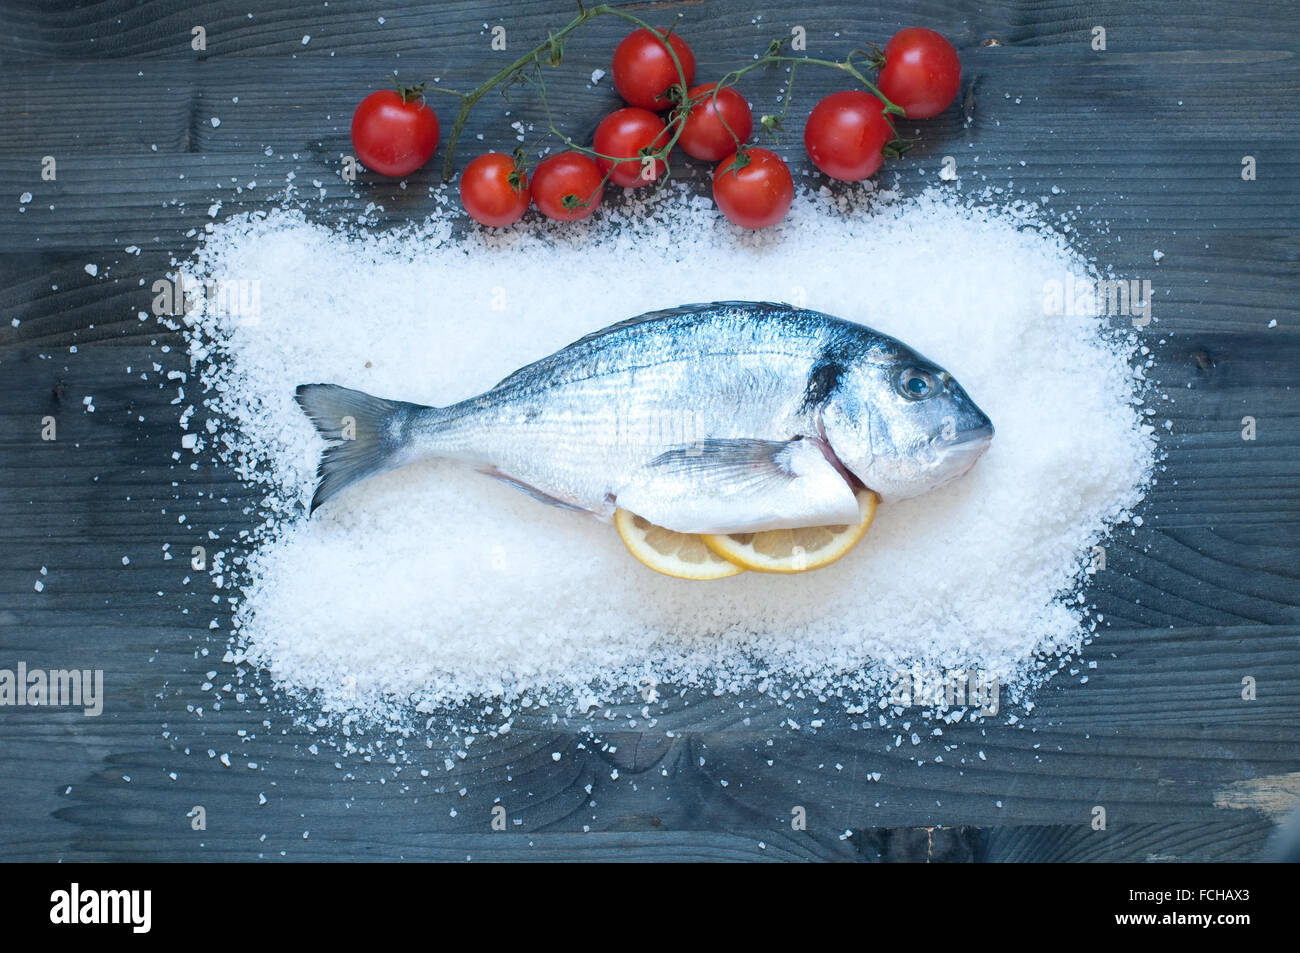 Bream cooked in salt and then baked in the oven,italy Stock Photo